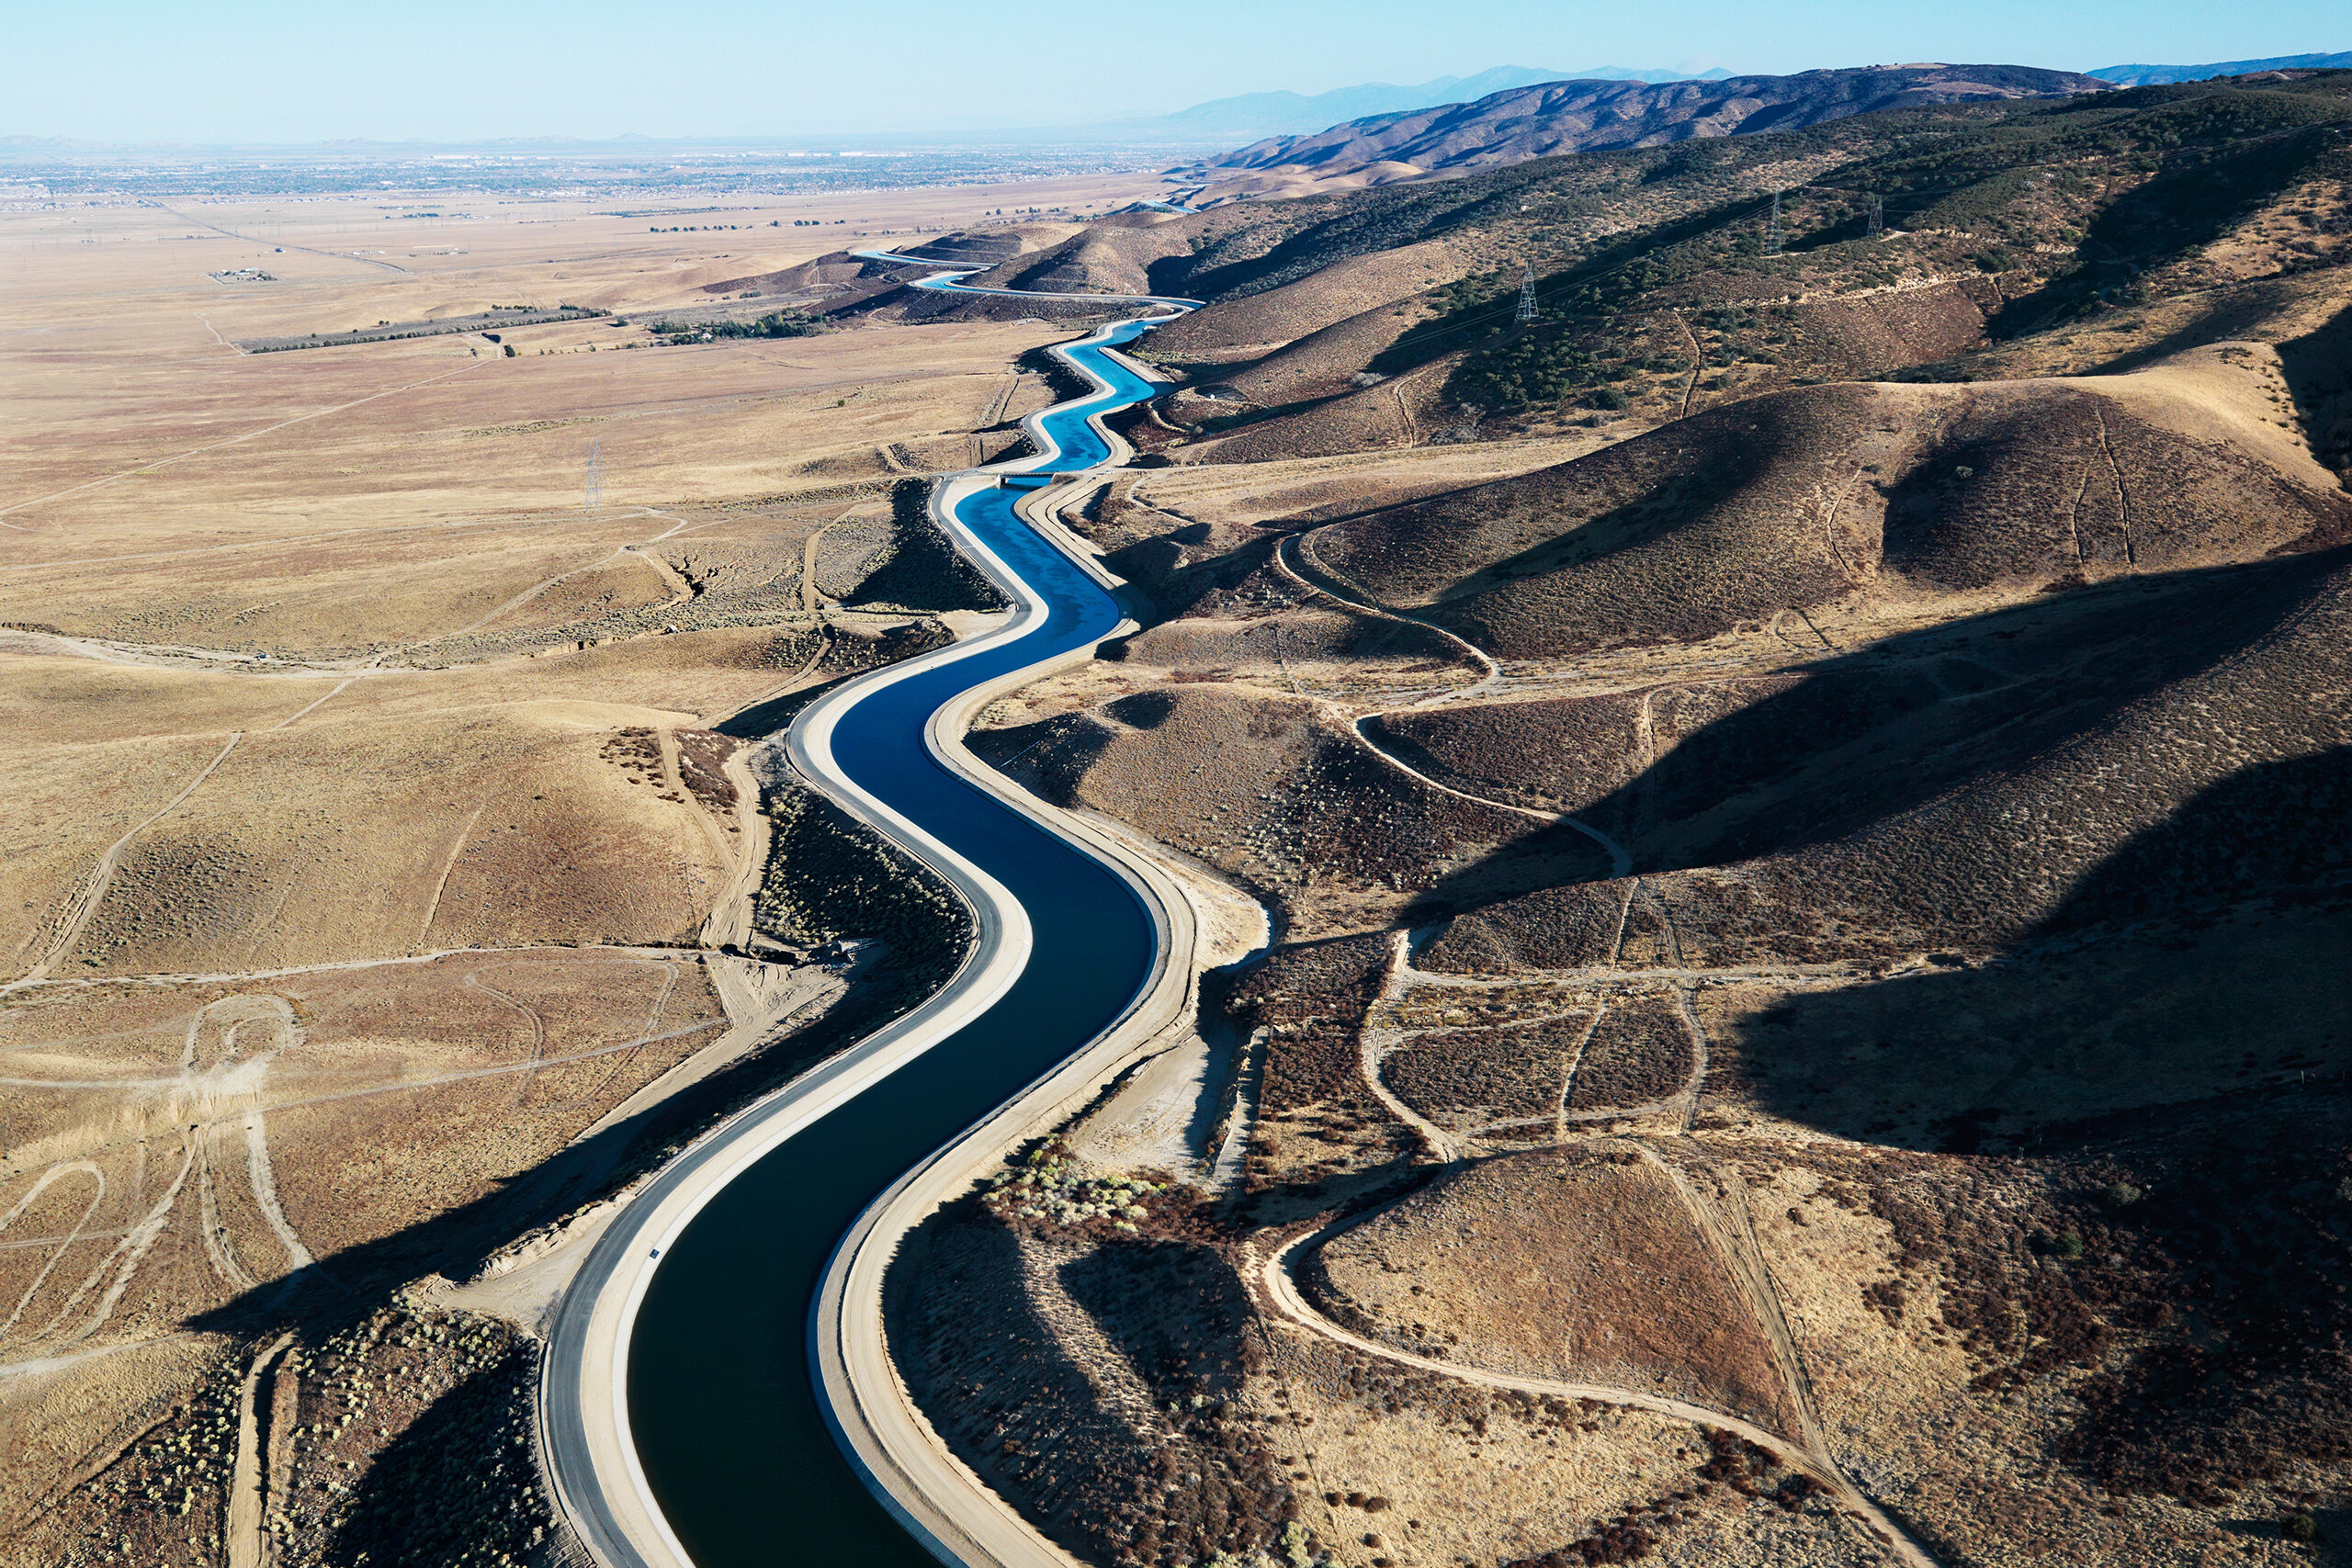 A snaking canal in a desert like environment.